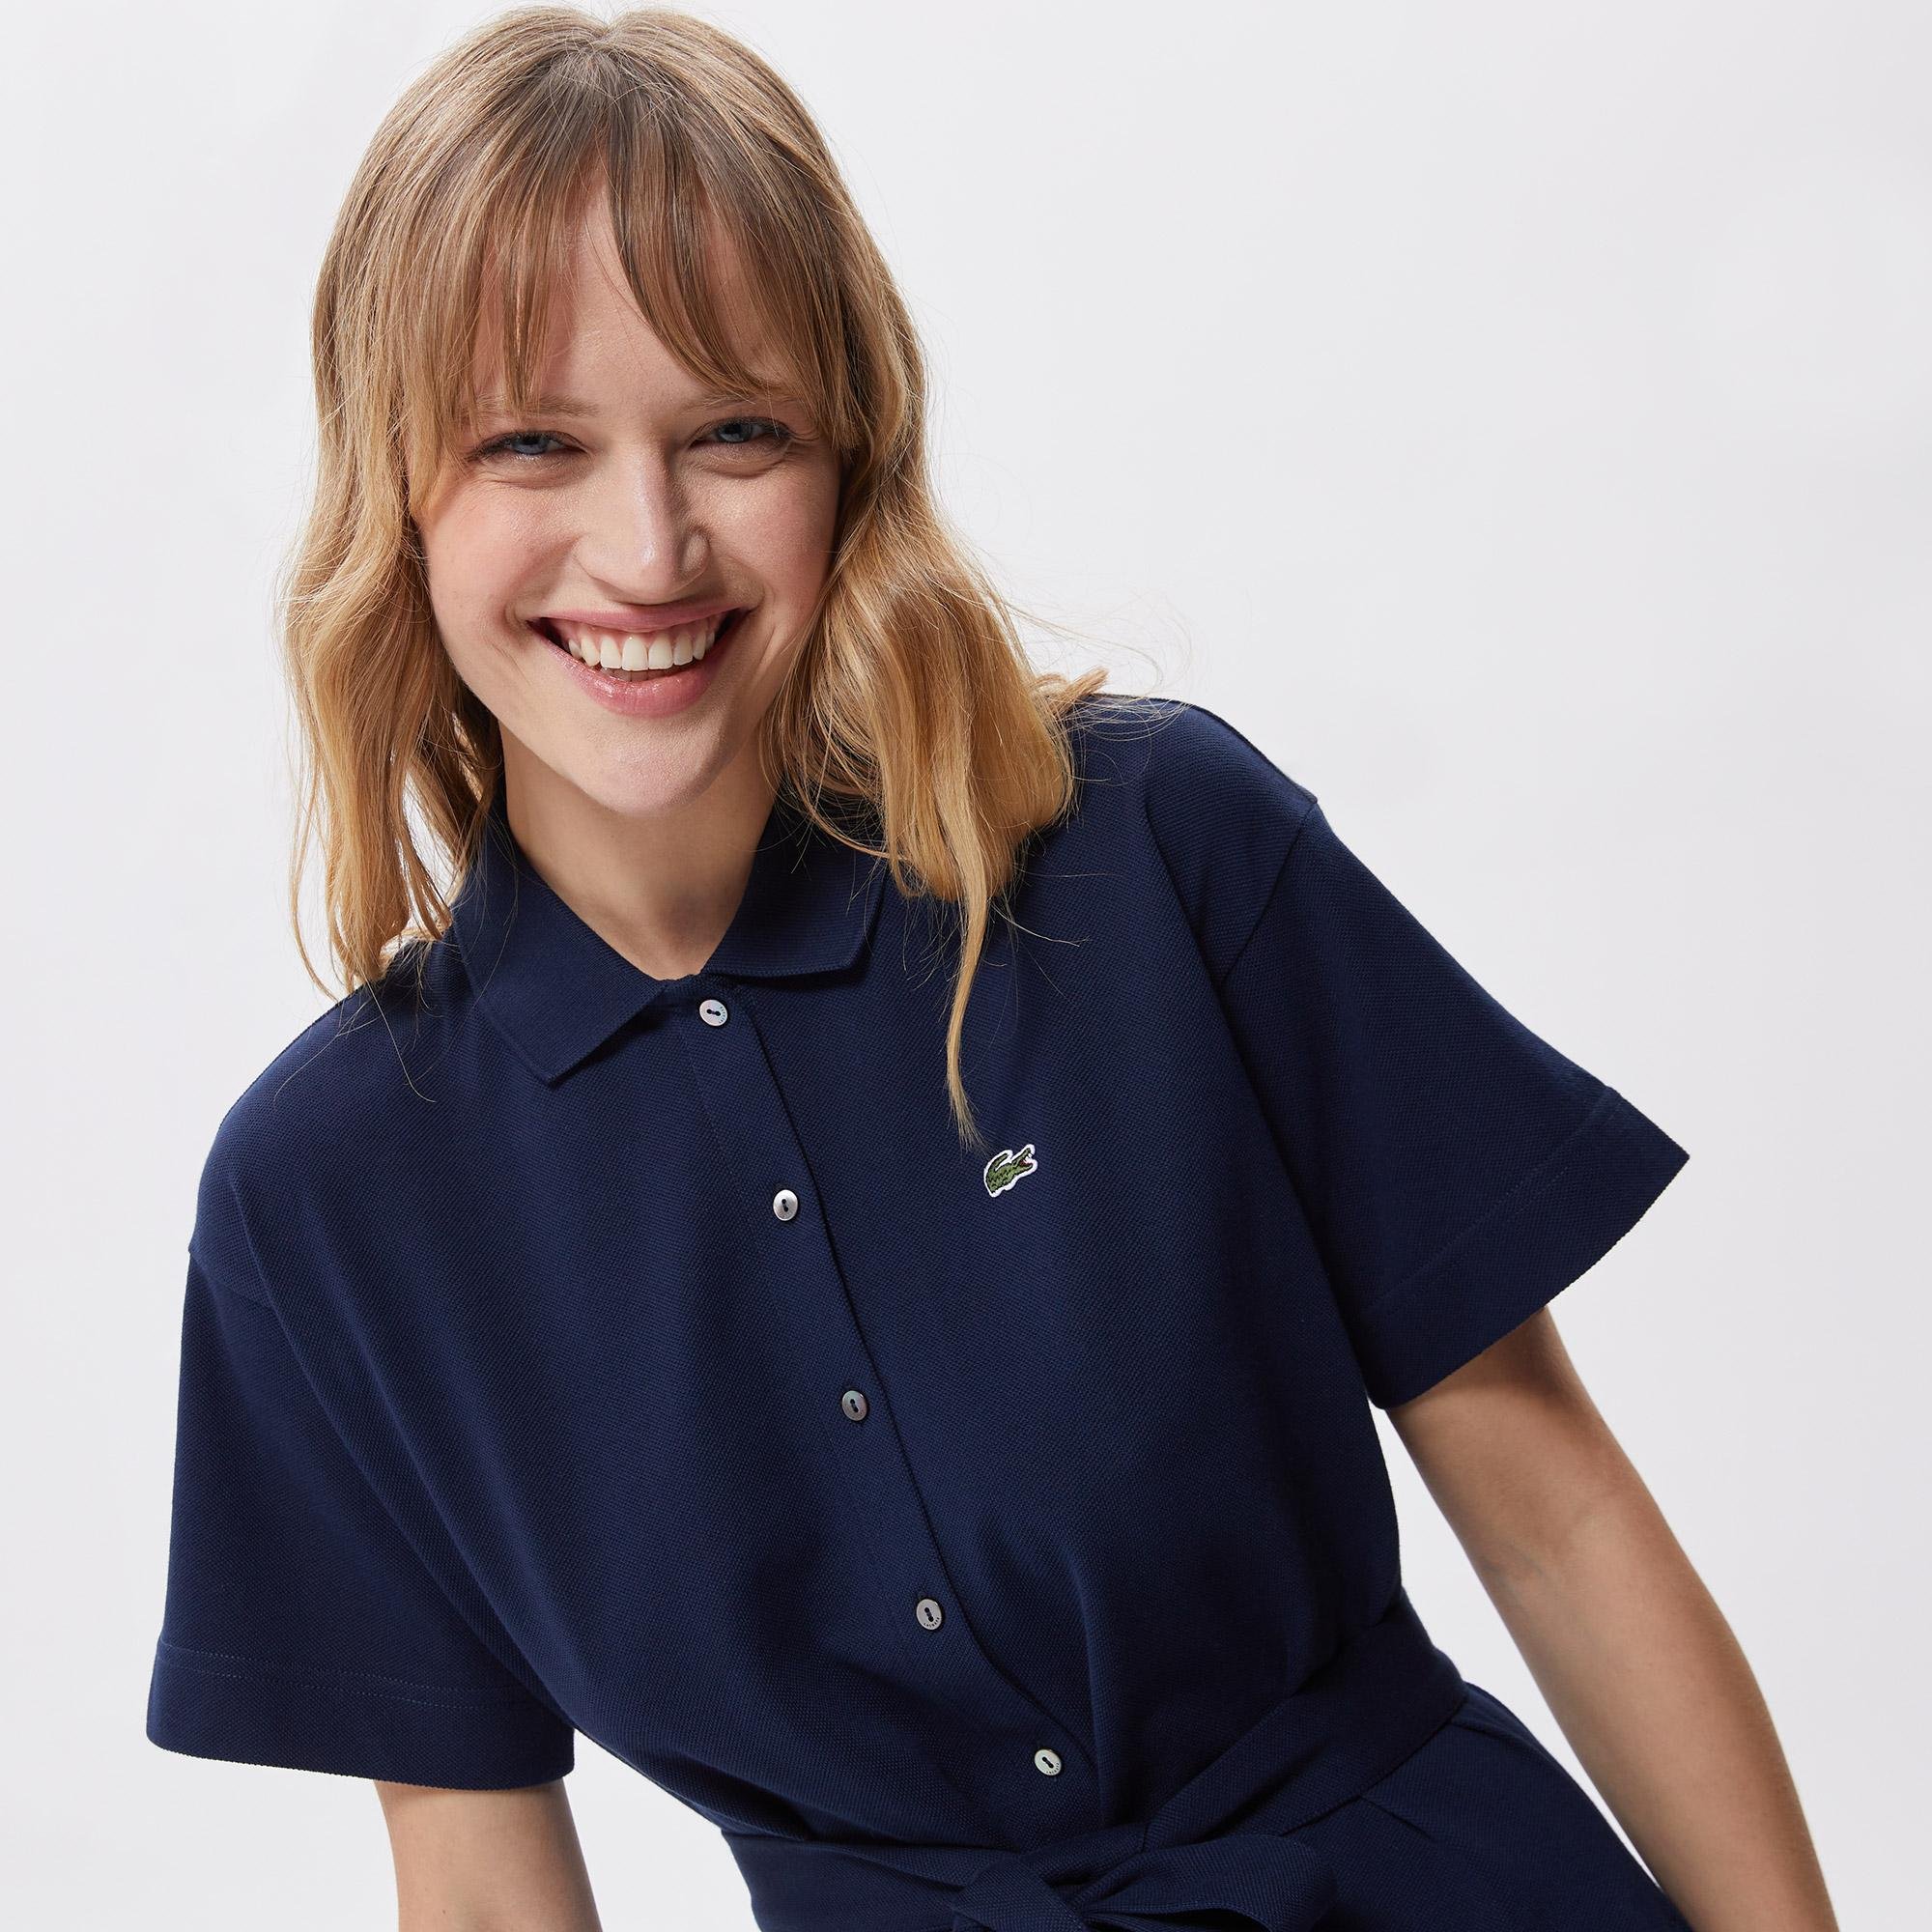 Women's Lacoste dress with polo collar in navy blue